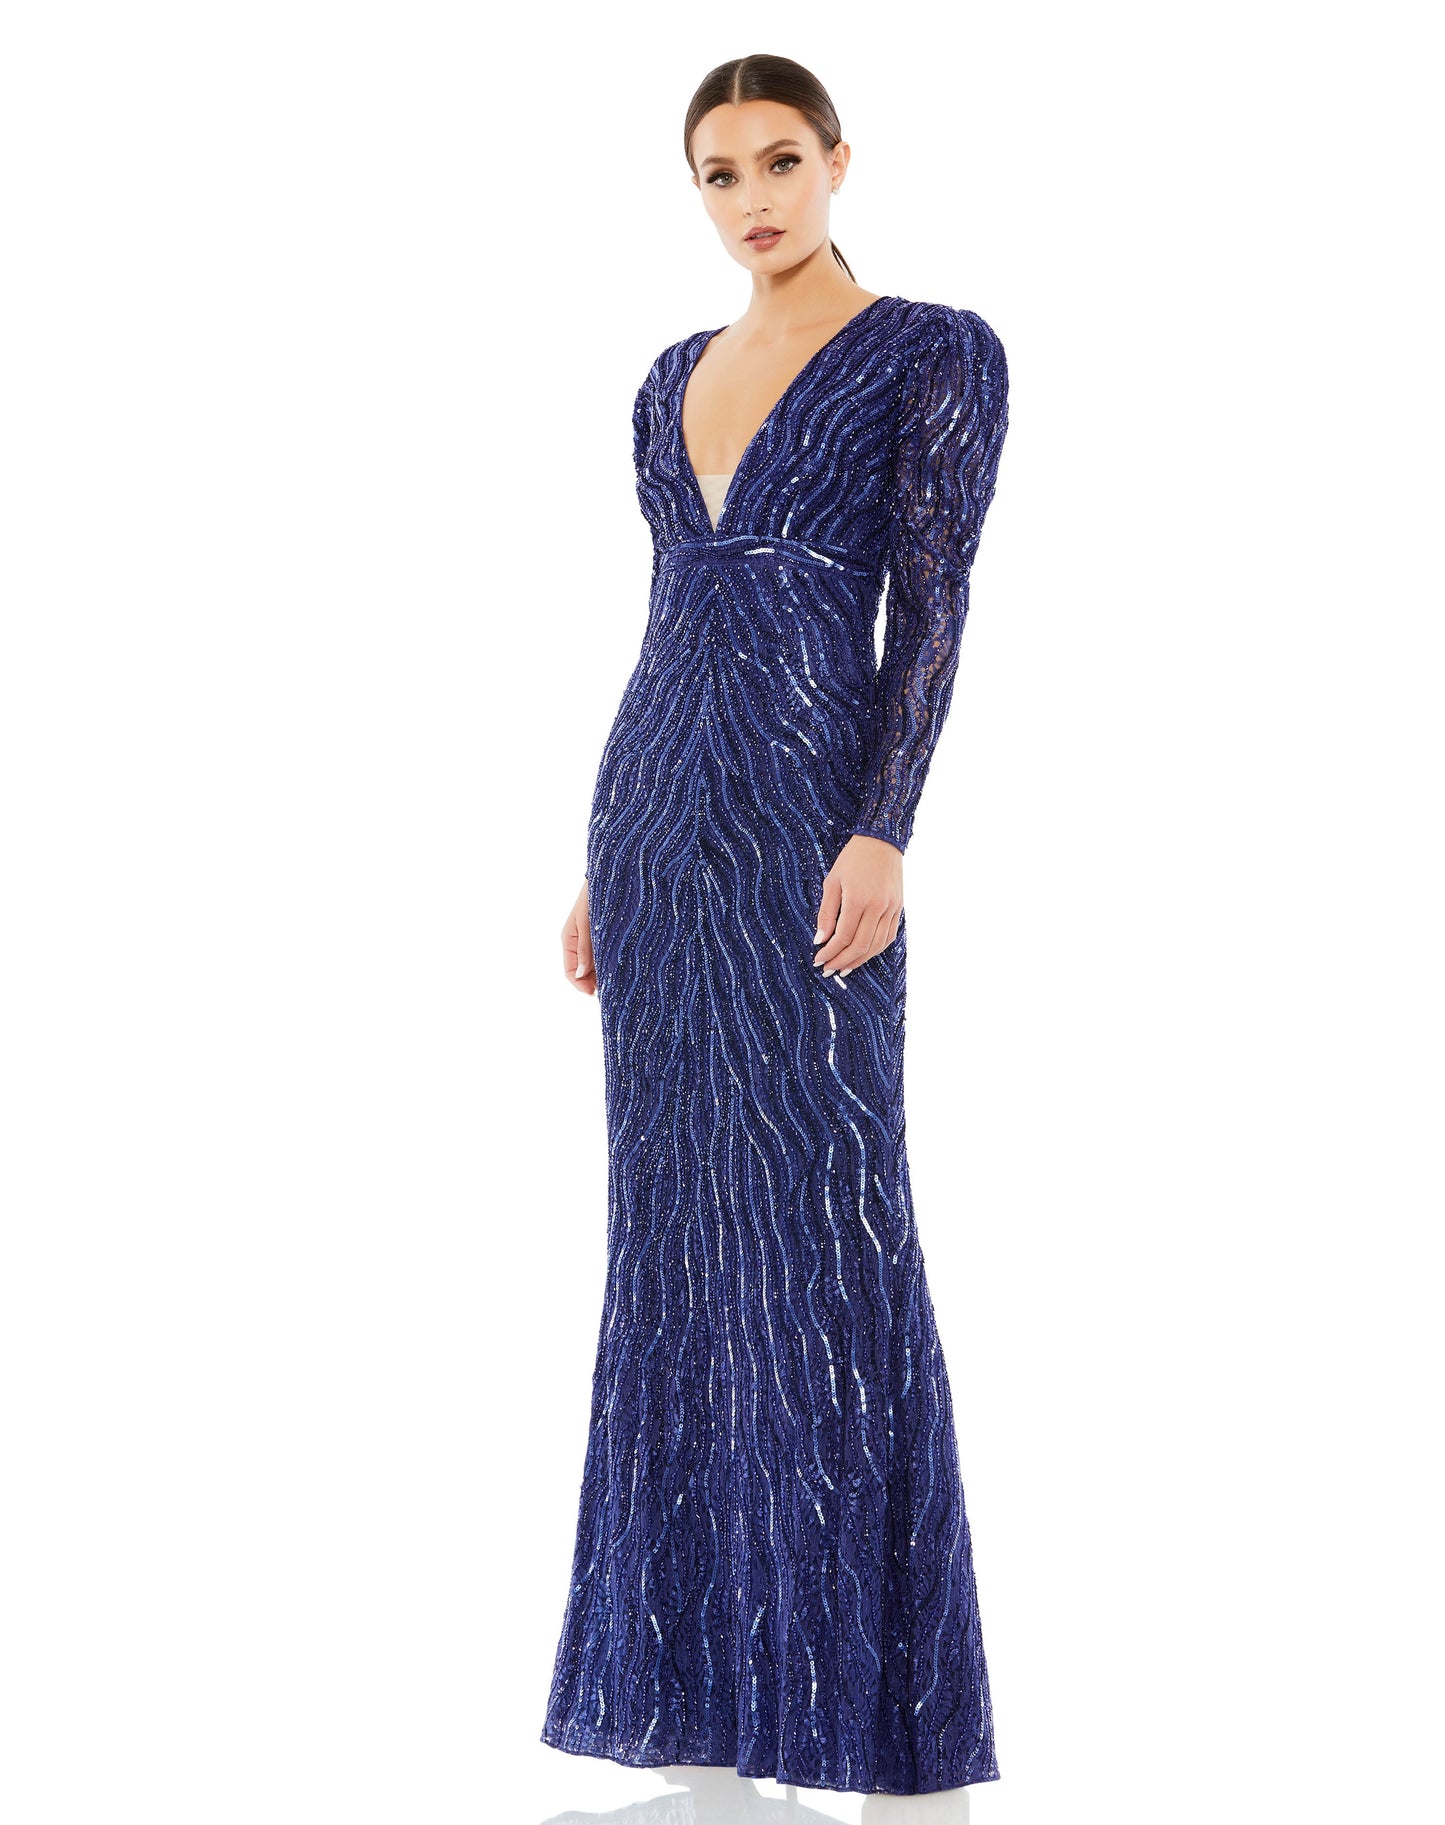 Elegant puff sleeve trumpet gown adorned with sequins and beading throughout. Plunging v-neckline features a semi-sheer mesh inset, and an embellished waistband defines the waist. Mac Duggal Fully Lined Back Zipper 100% Polyester Long Sleeve Full Length V